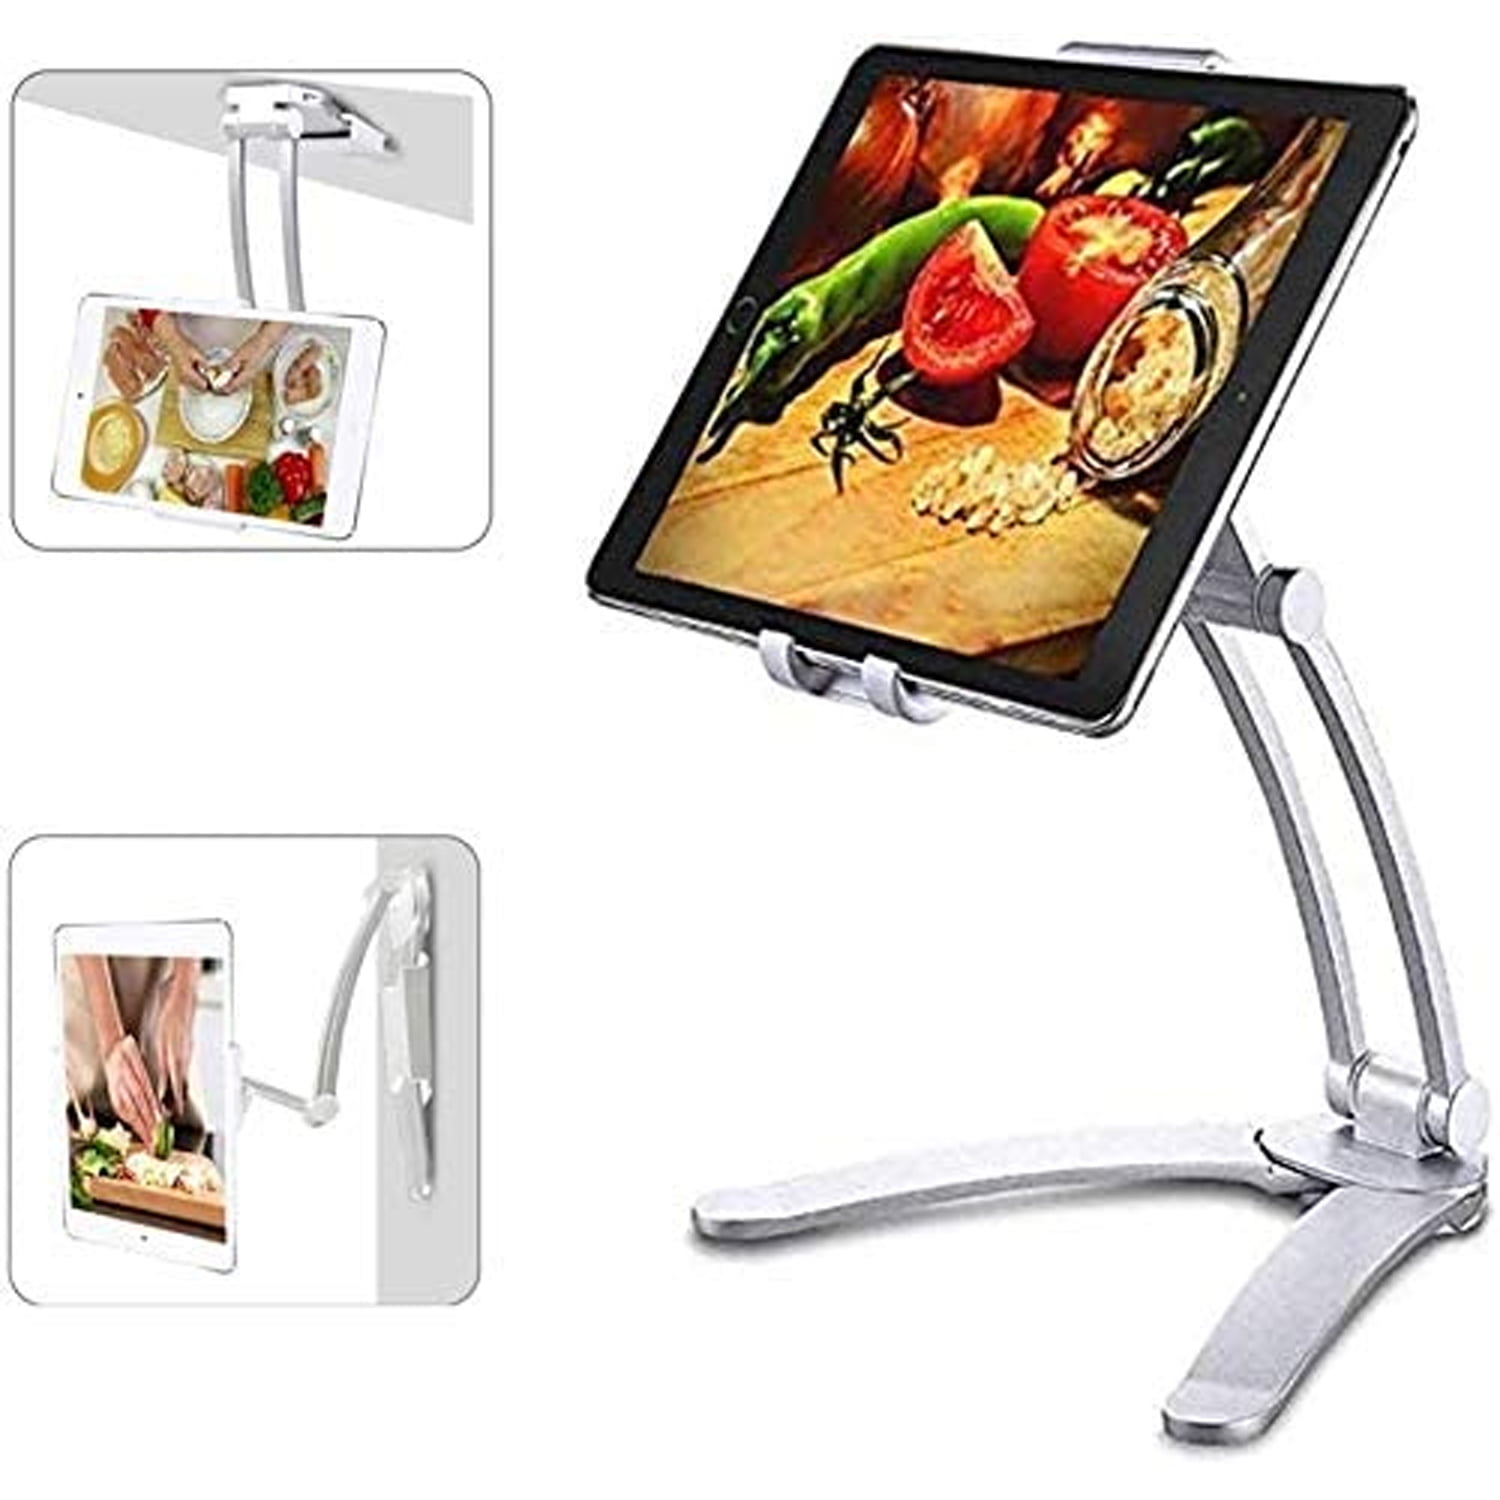 2 Adjustable Tablet Mount for Cabinets Counter Tops Walls fits iPad 9.7 6th Gen 